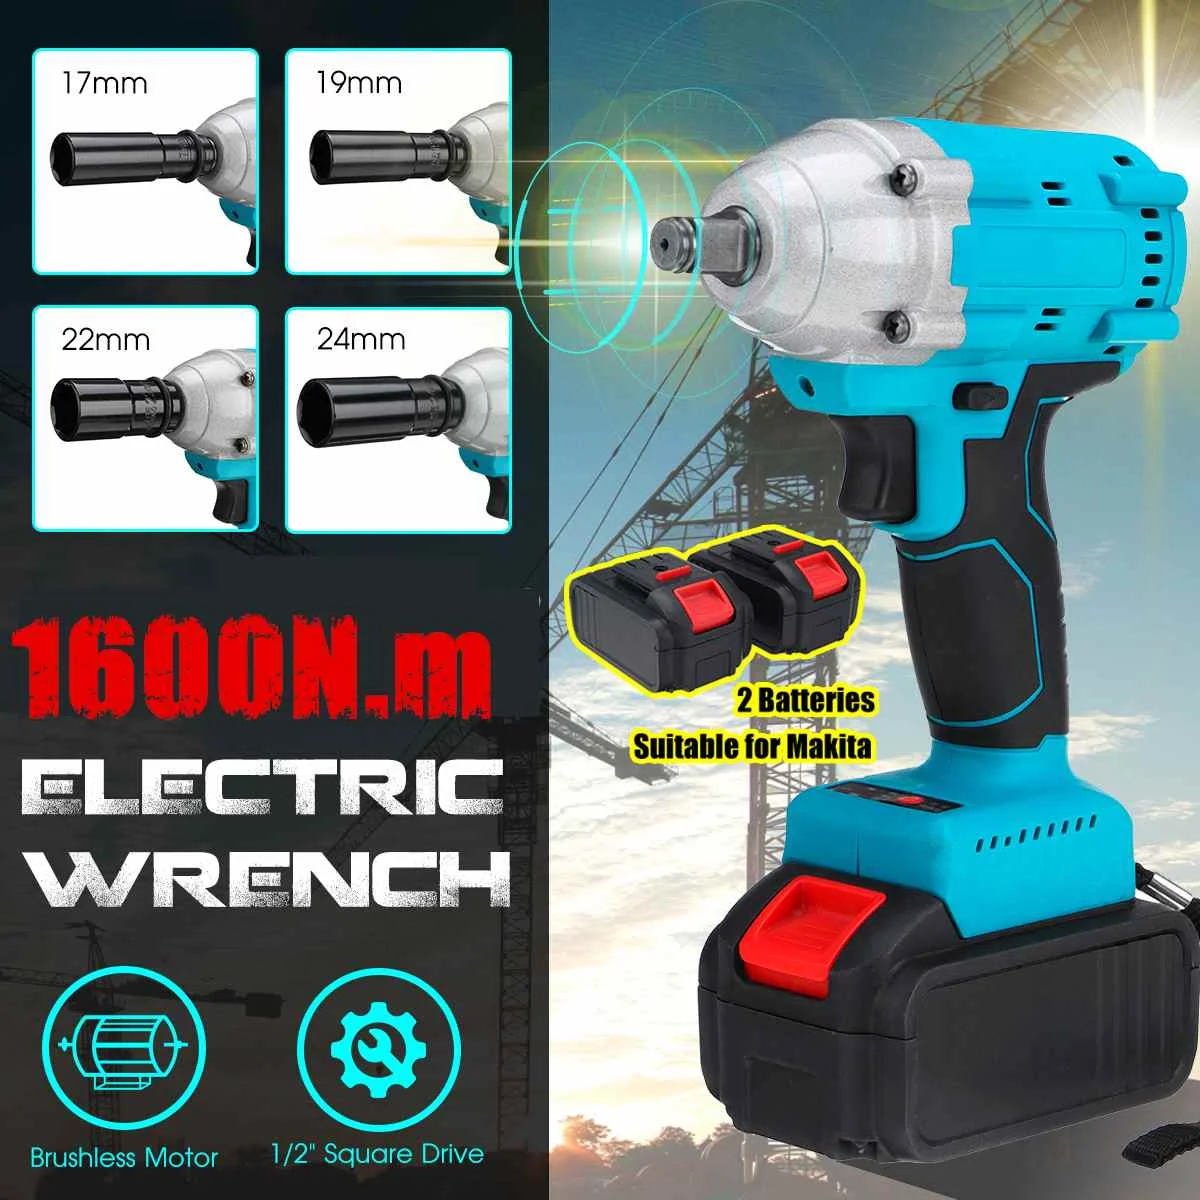 

1600N.m 588Vf High Torque Brushless Wrench Cordless Electric Impact Wrench 1/2 Socket Power Tools for Makita 18V Battery